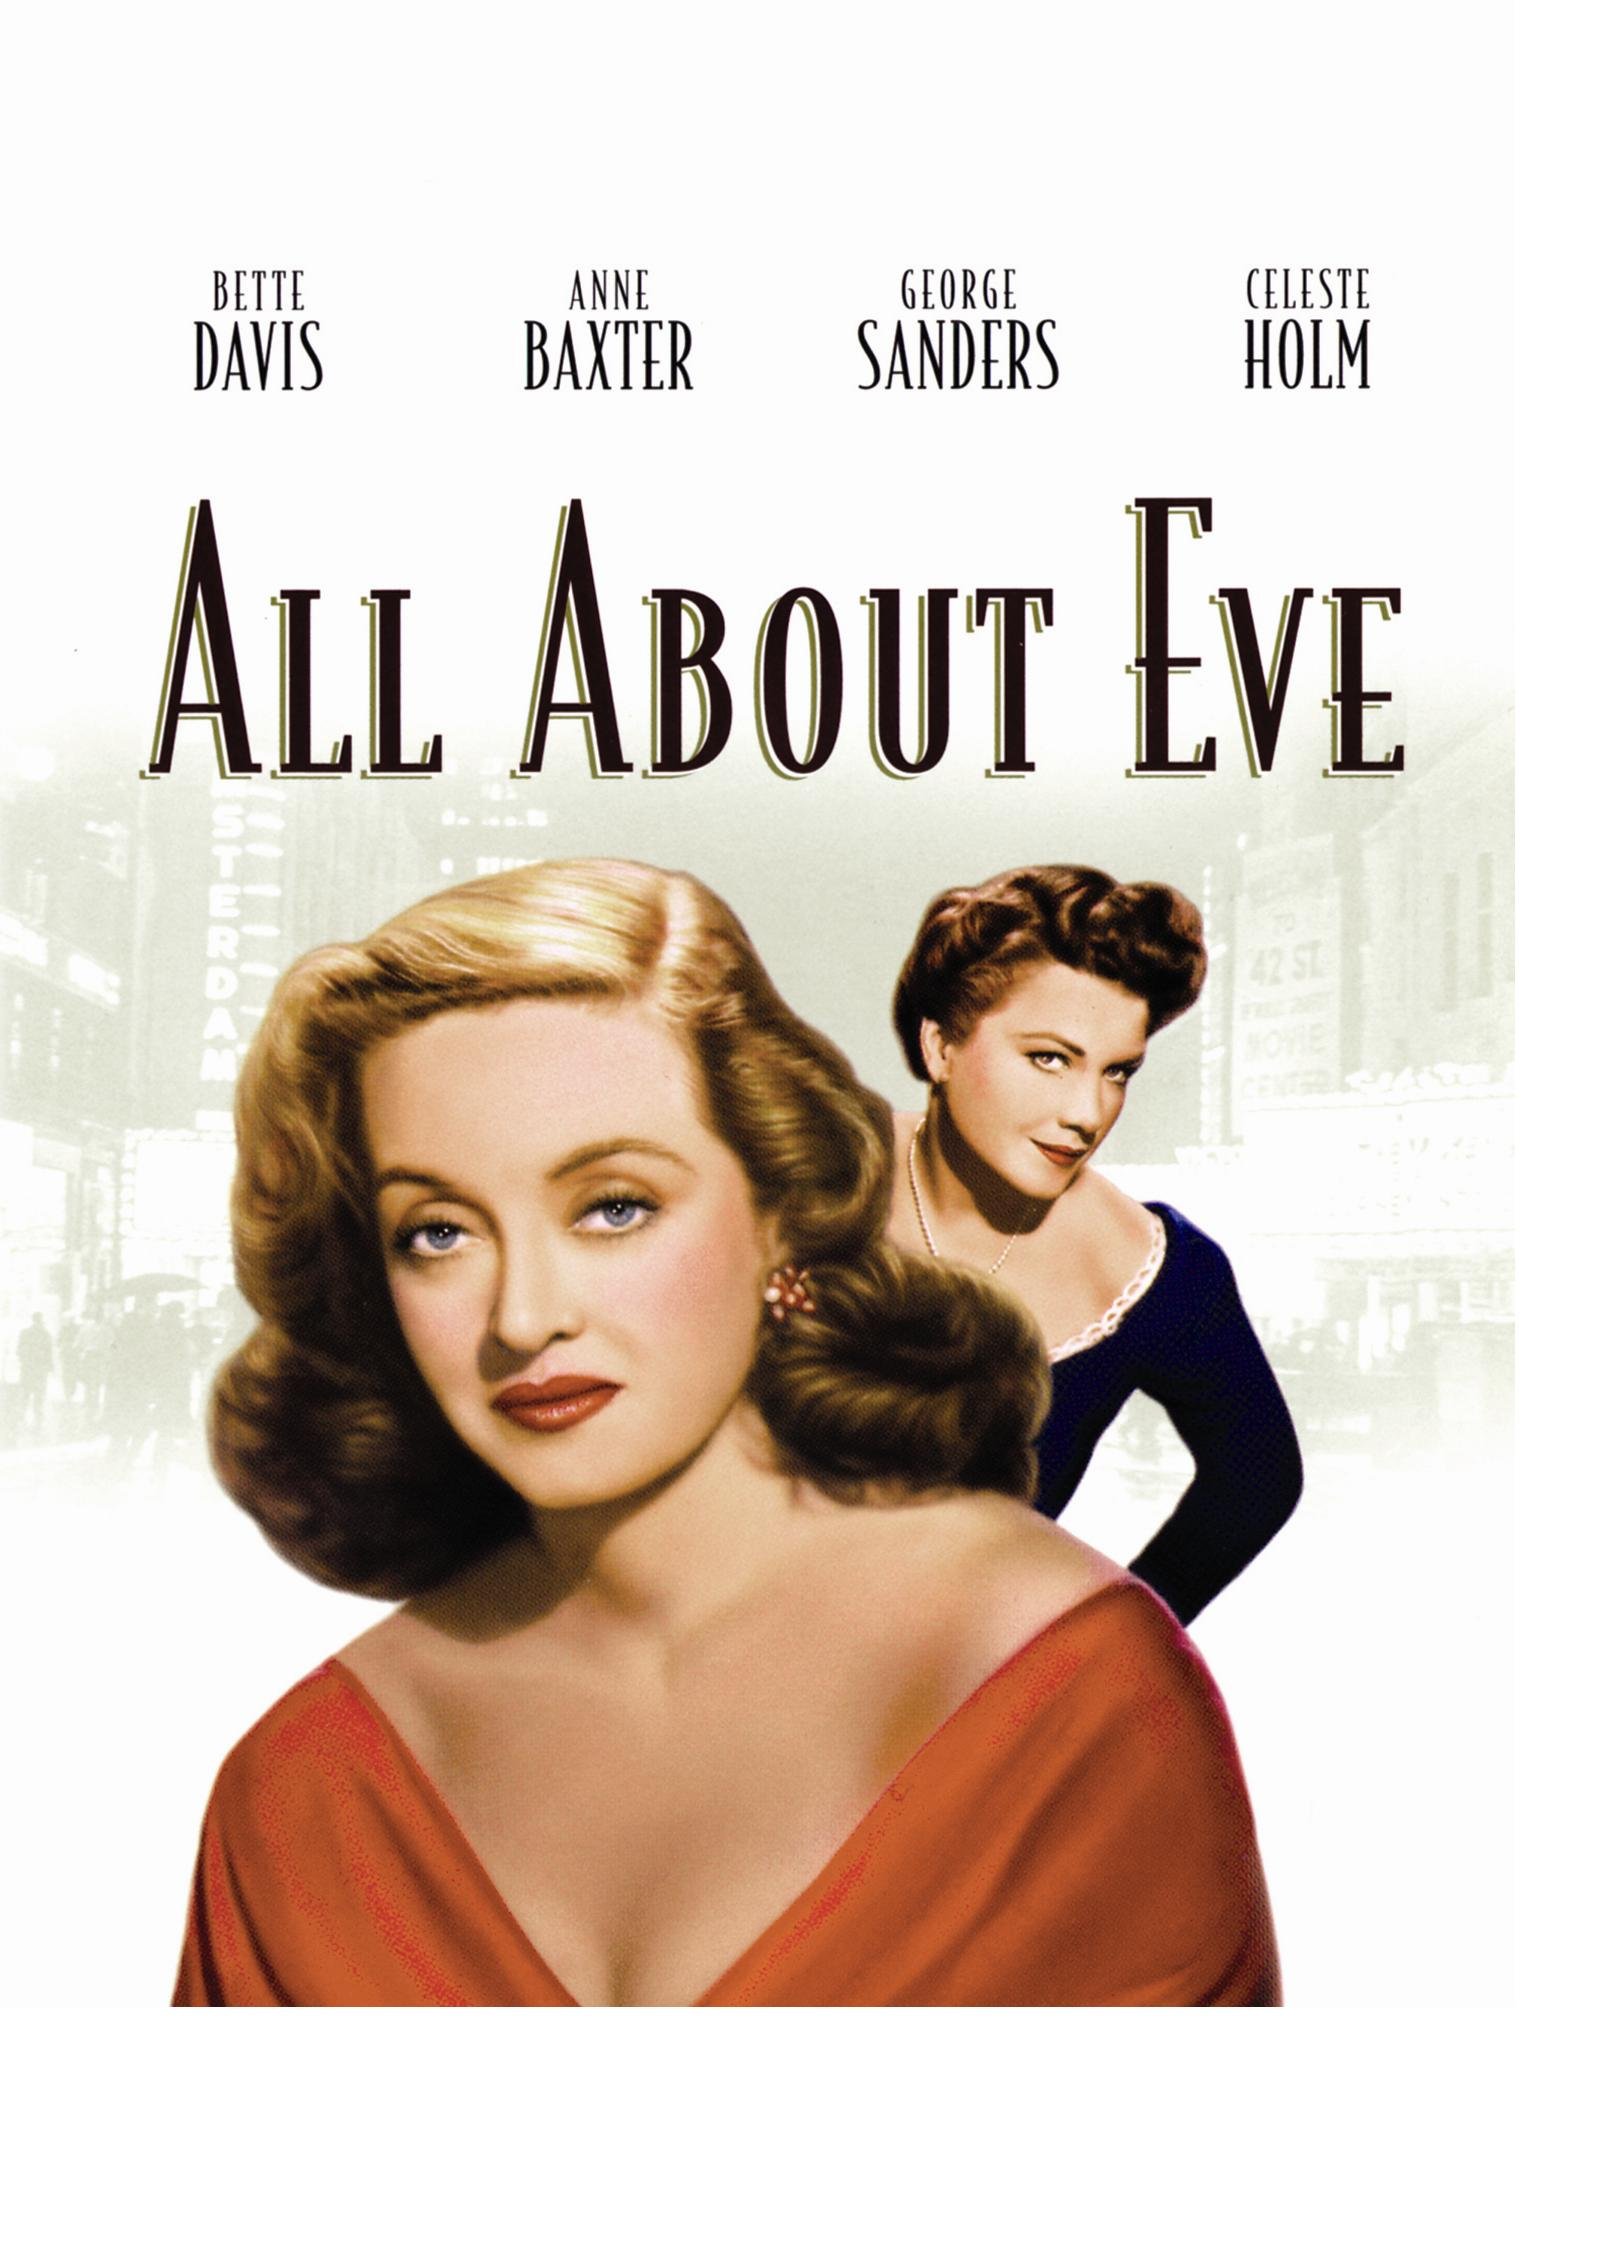 All About Eve Theatrical Poster